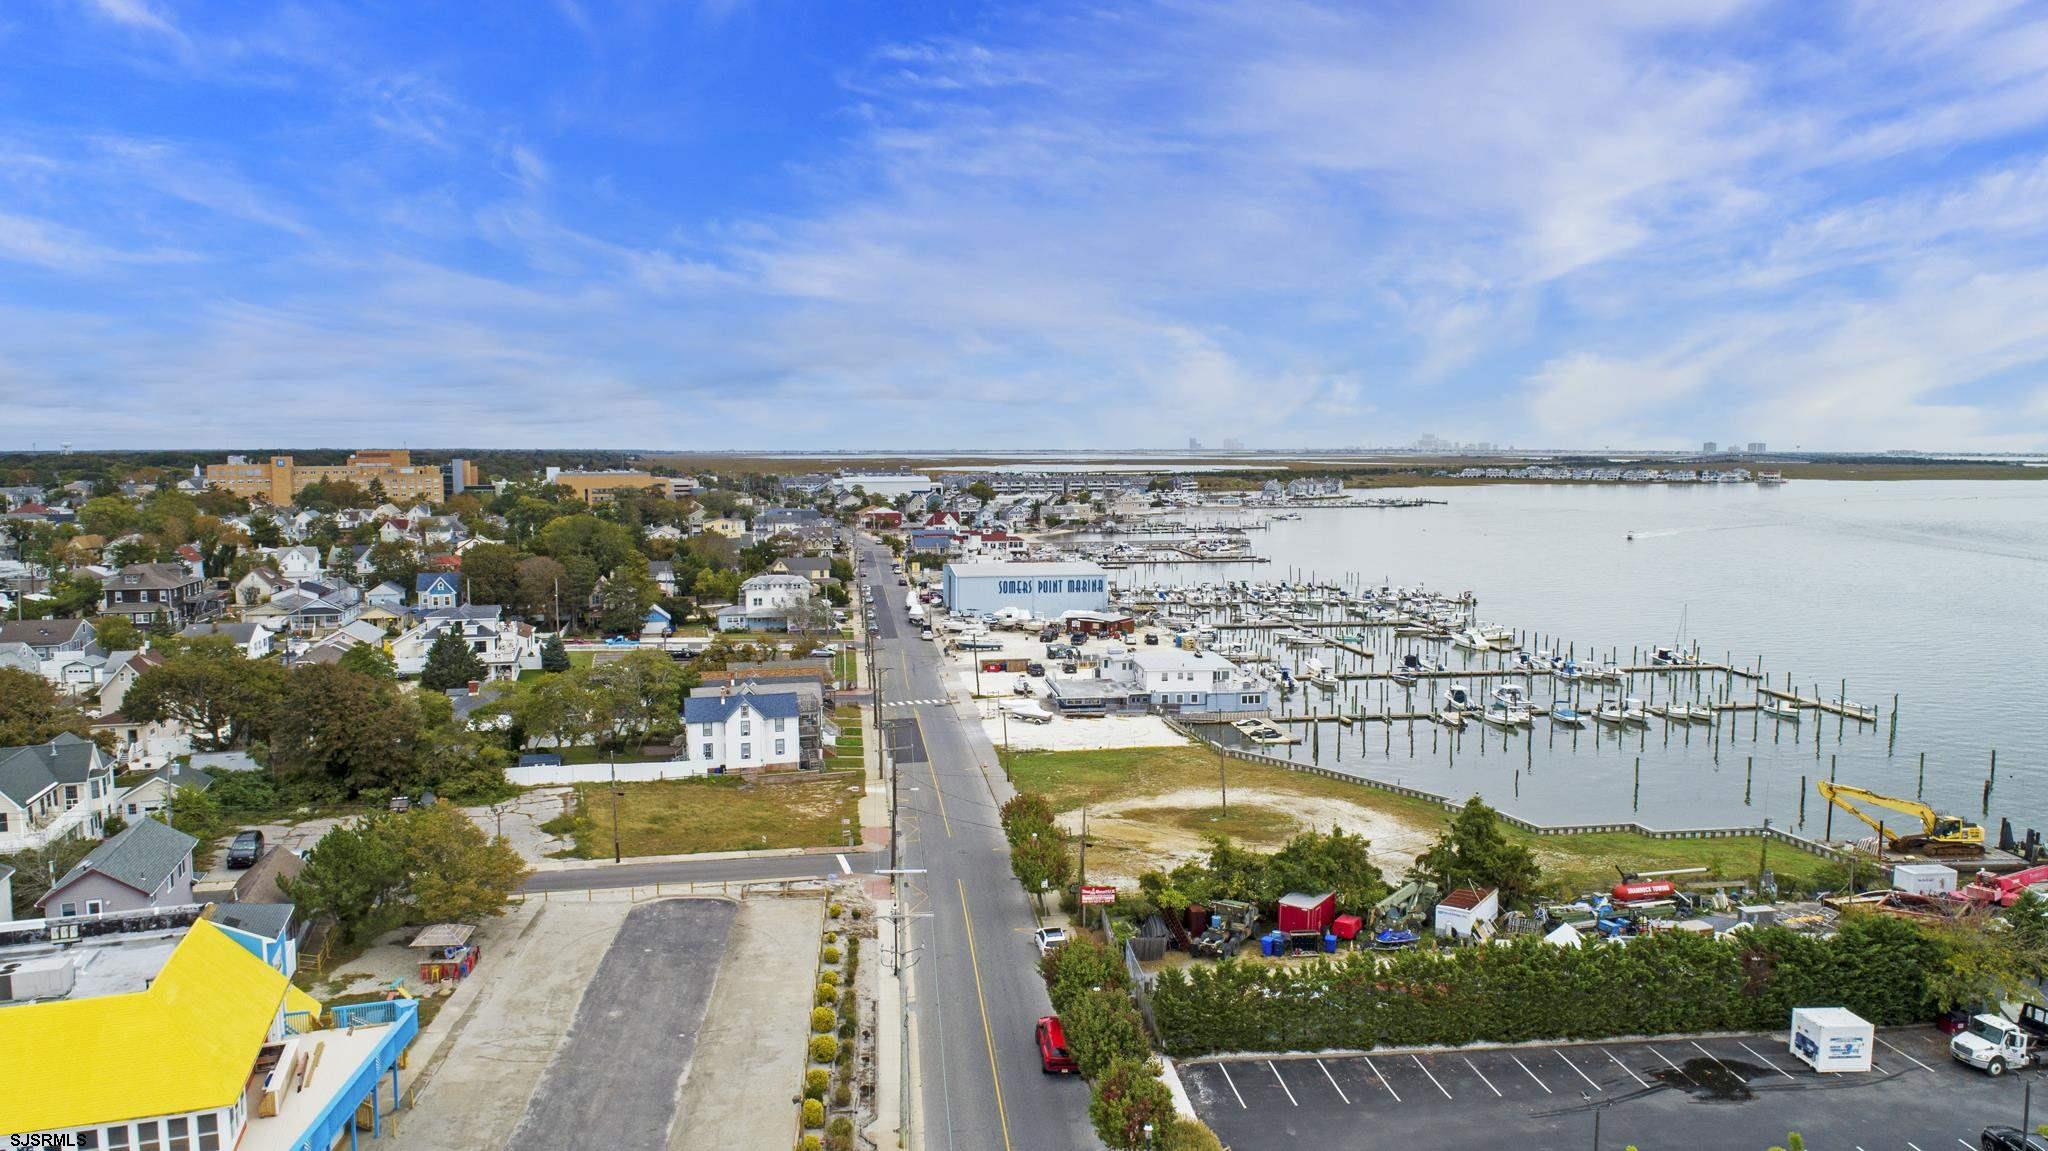 Somers Point Real Estate Listings & Homes for Sale | Goldcoast SIR